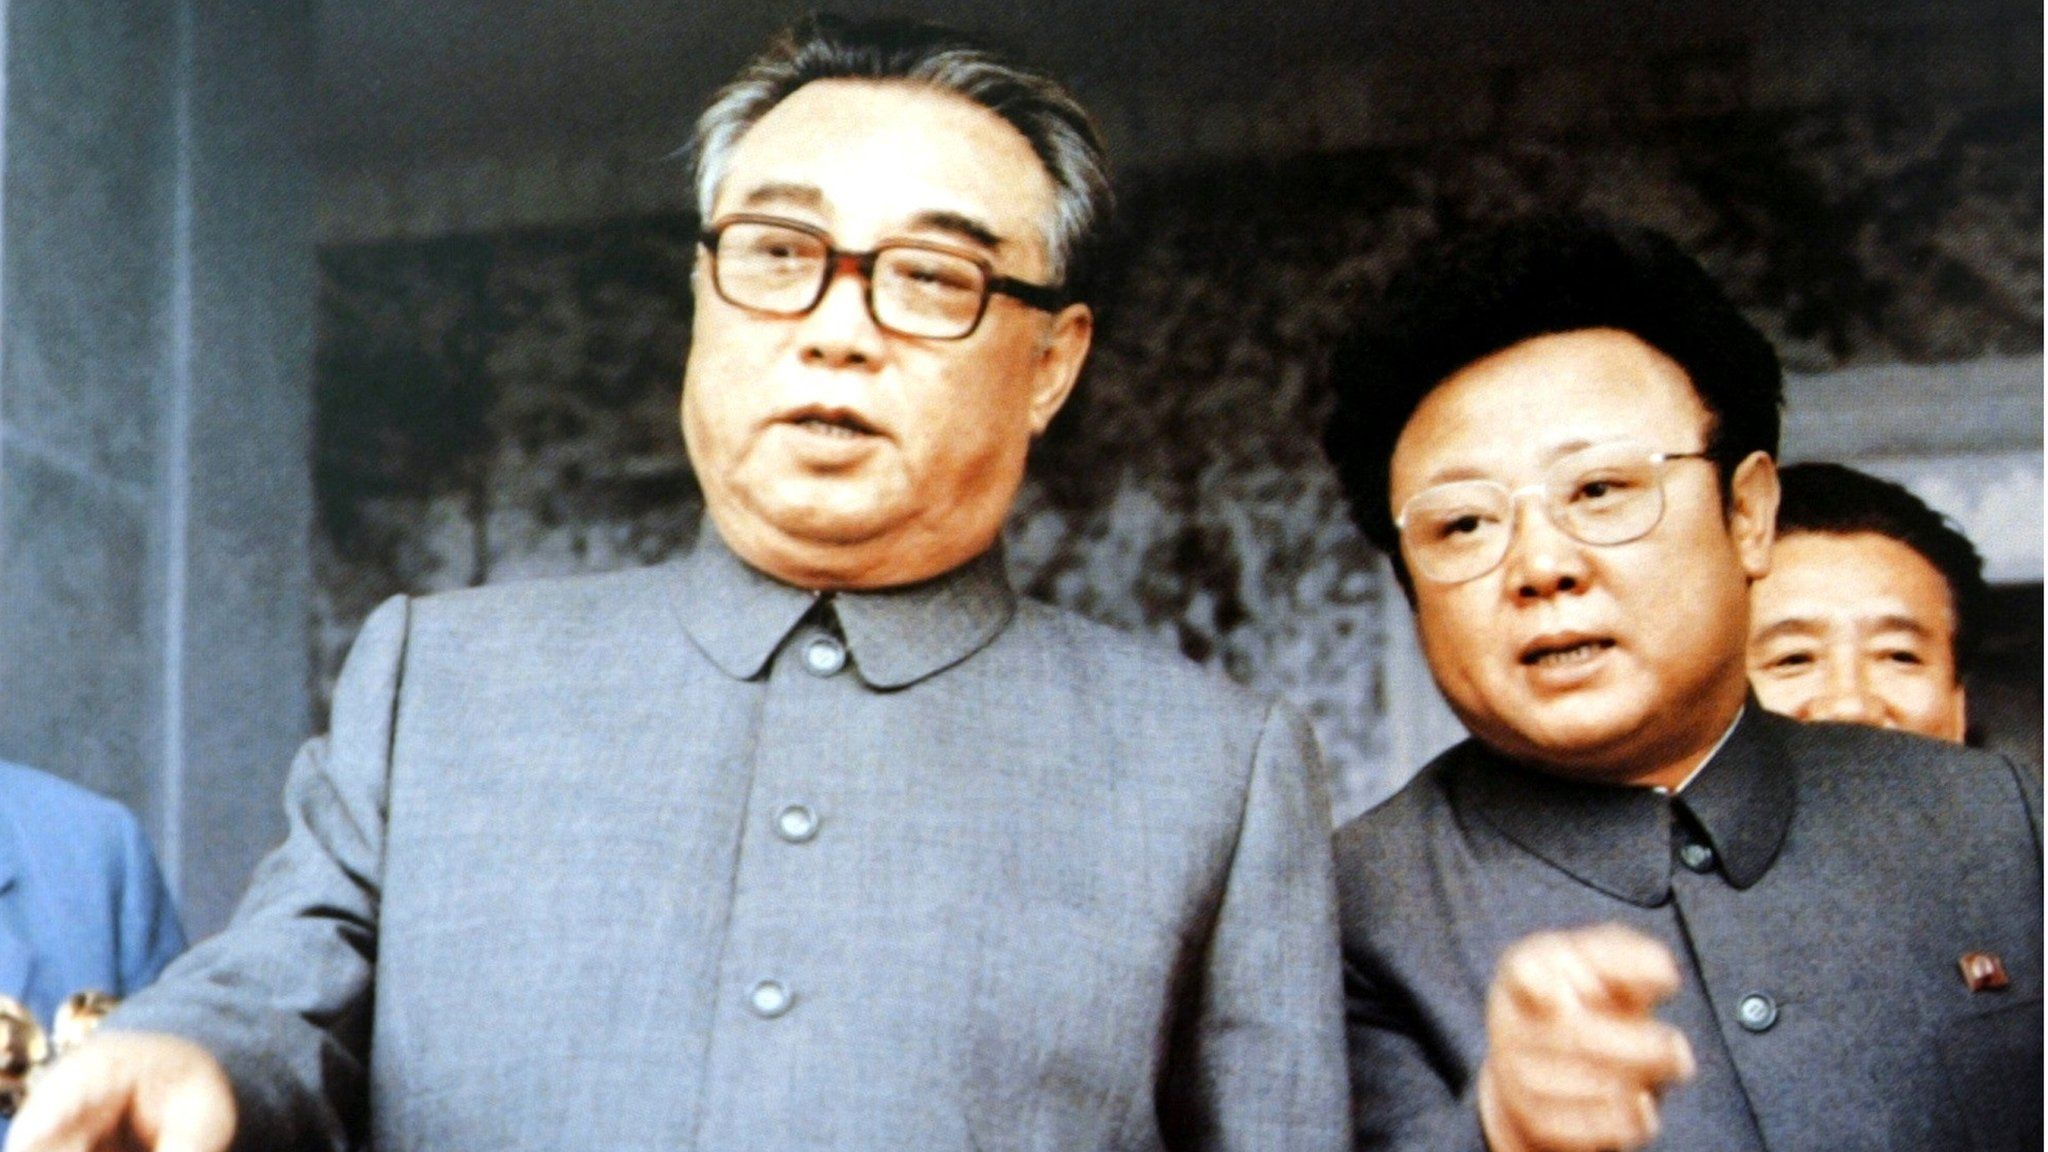 Kim Il-sung, founder of North Korea, chats with his son Kim Jong-il at a mass rally to celebrate the foundation of the country, in September 1983